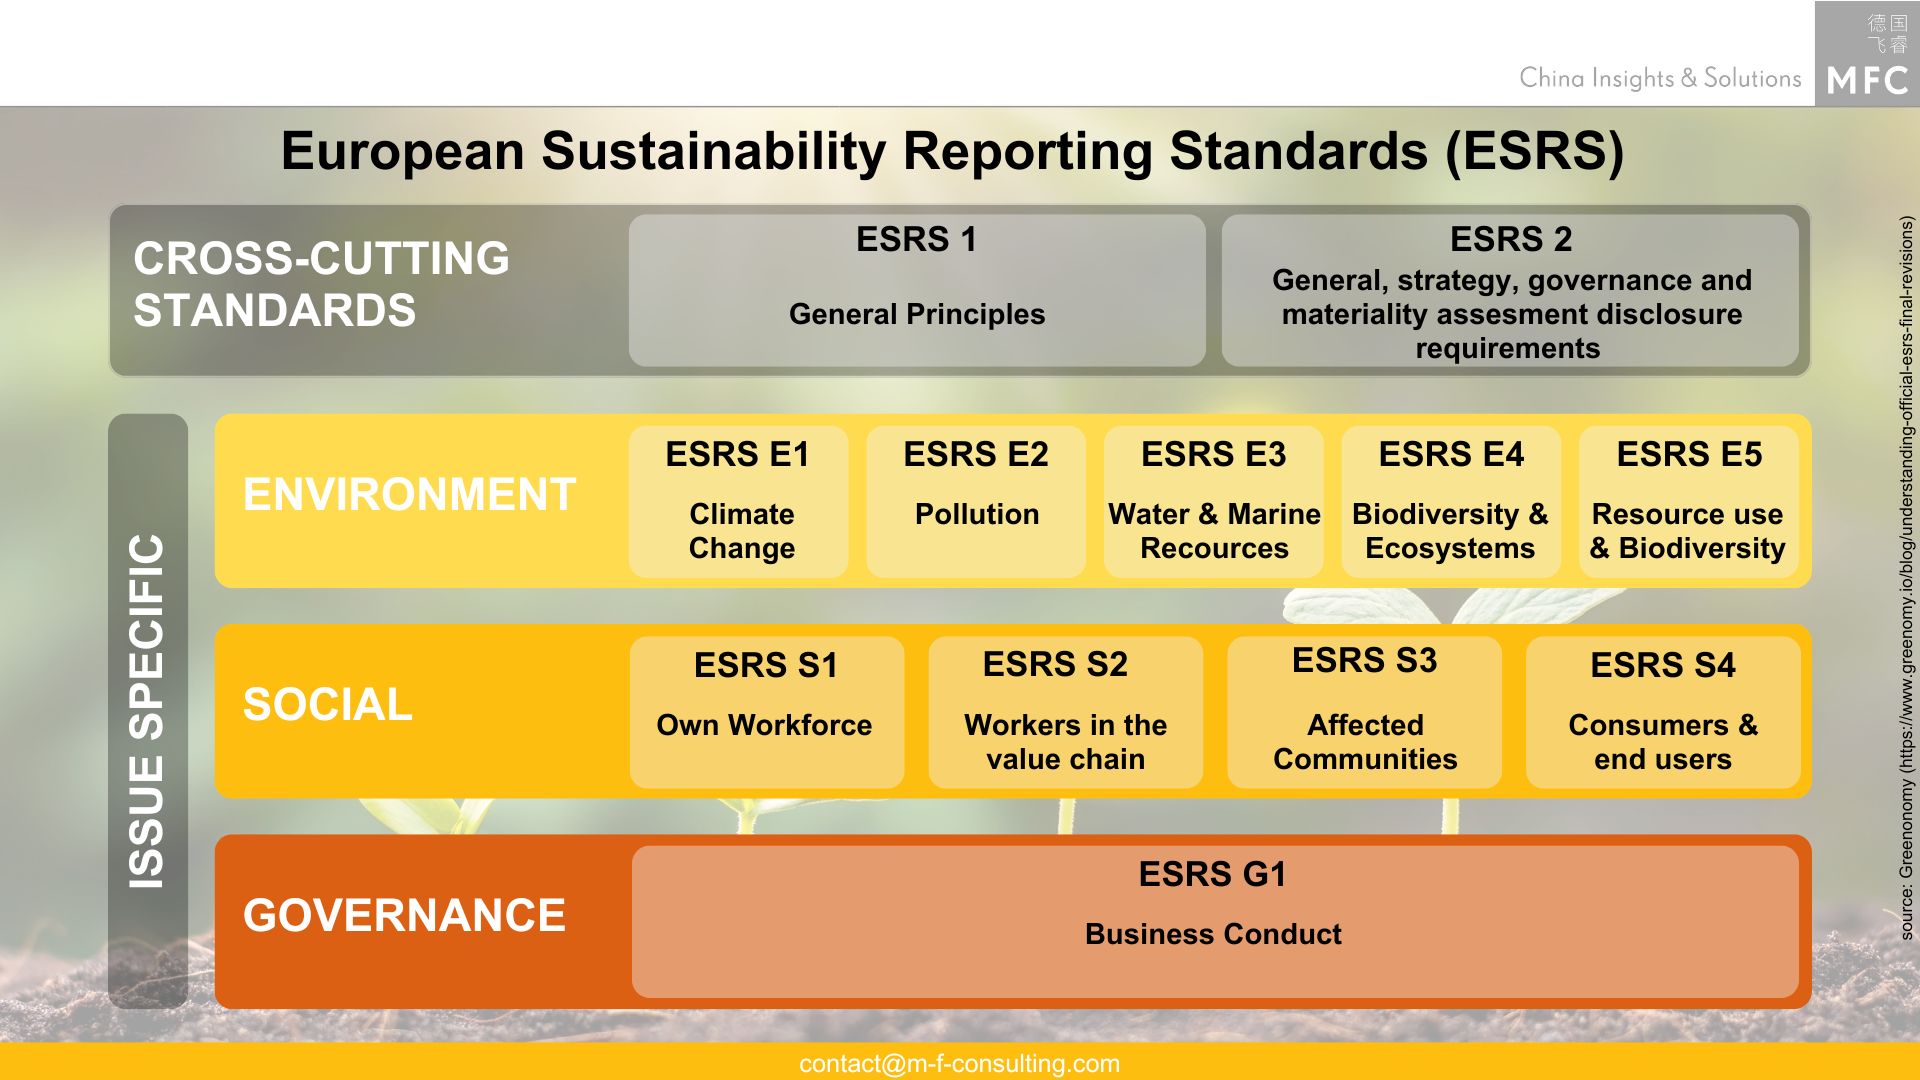 European Sustainability Reporting Standards (ESRS): Graphic on the contents of the ESRS.